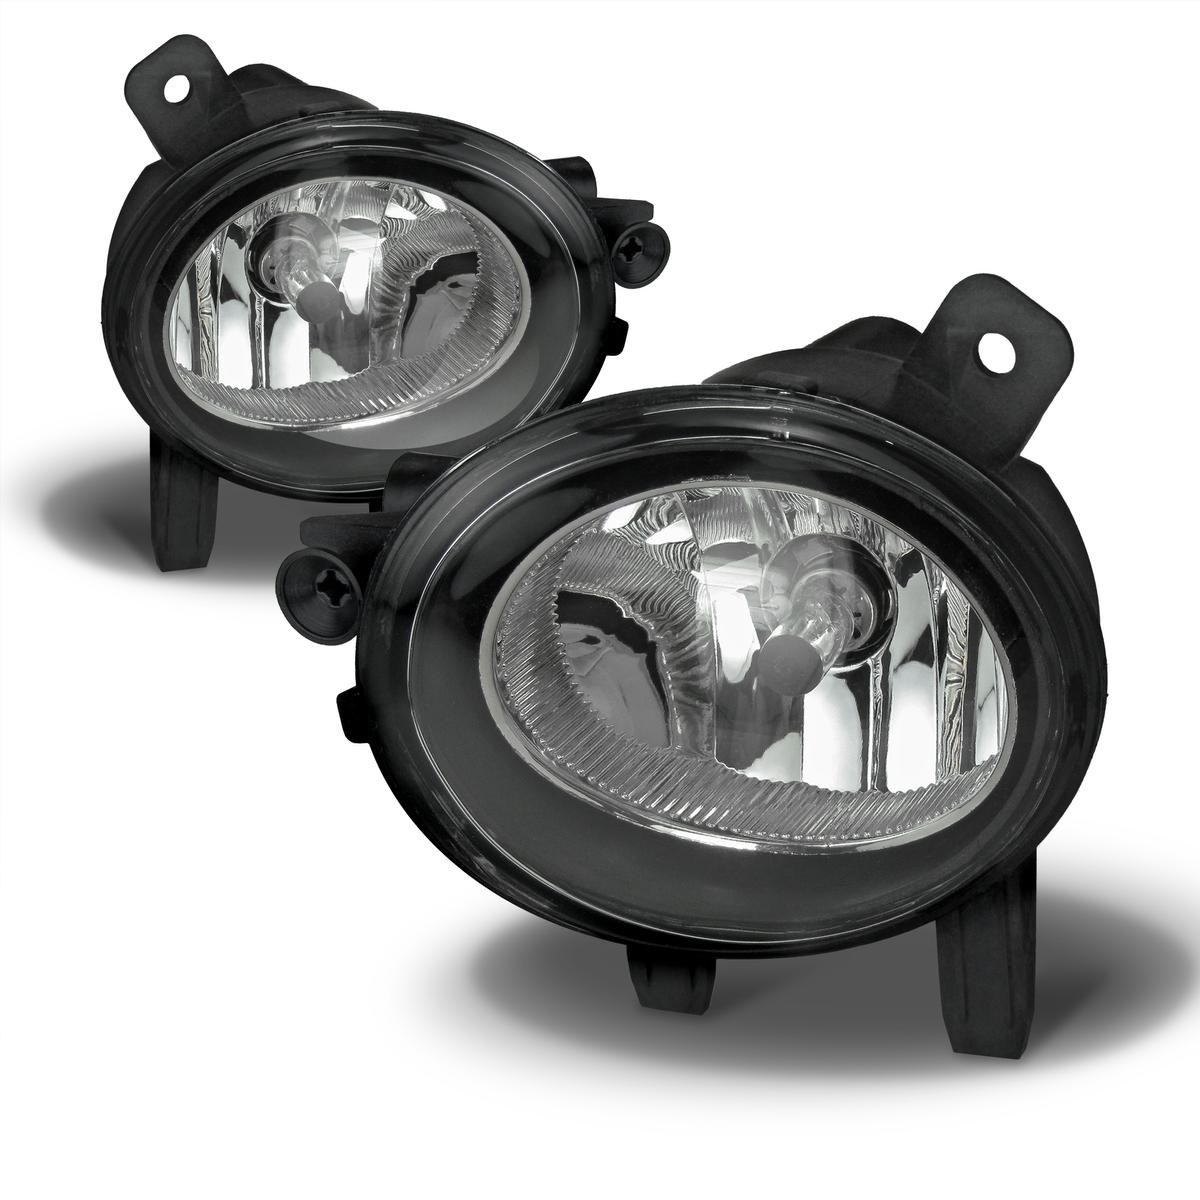 JOM Crystal clear, both sides, 12V, with bulb Lamp Type: H8 Fog Lamp 83022 buy